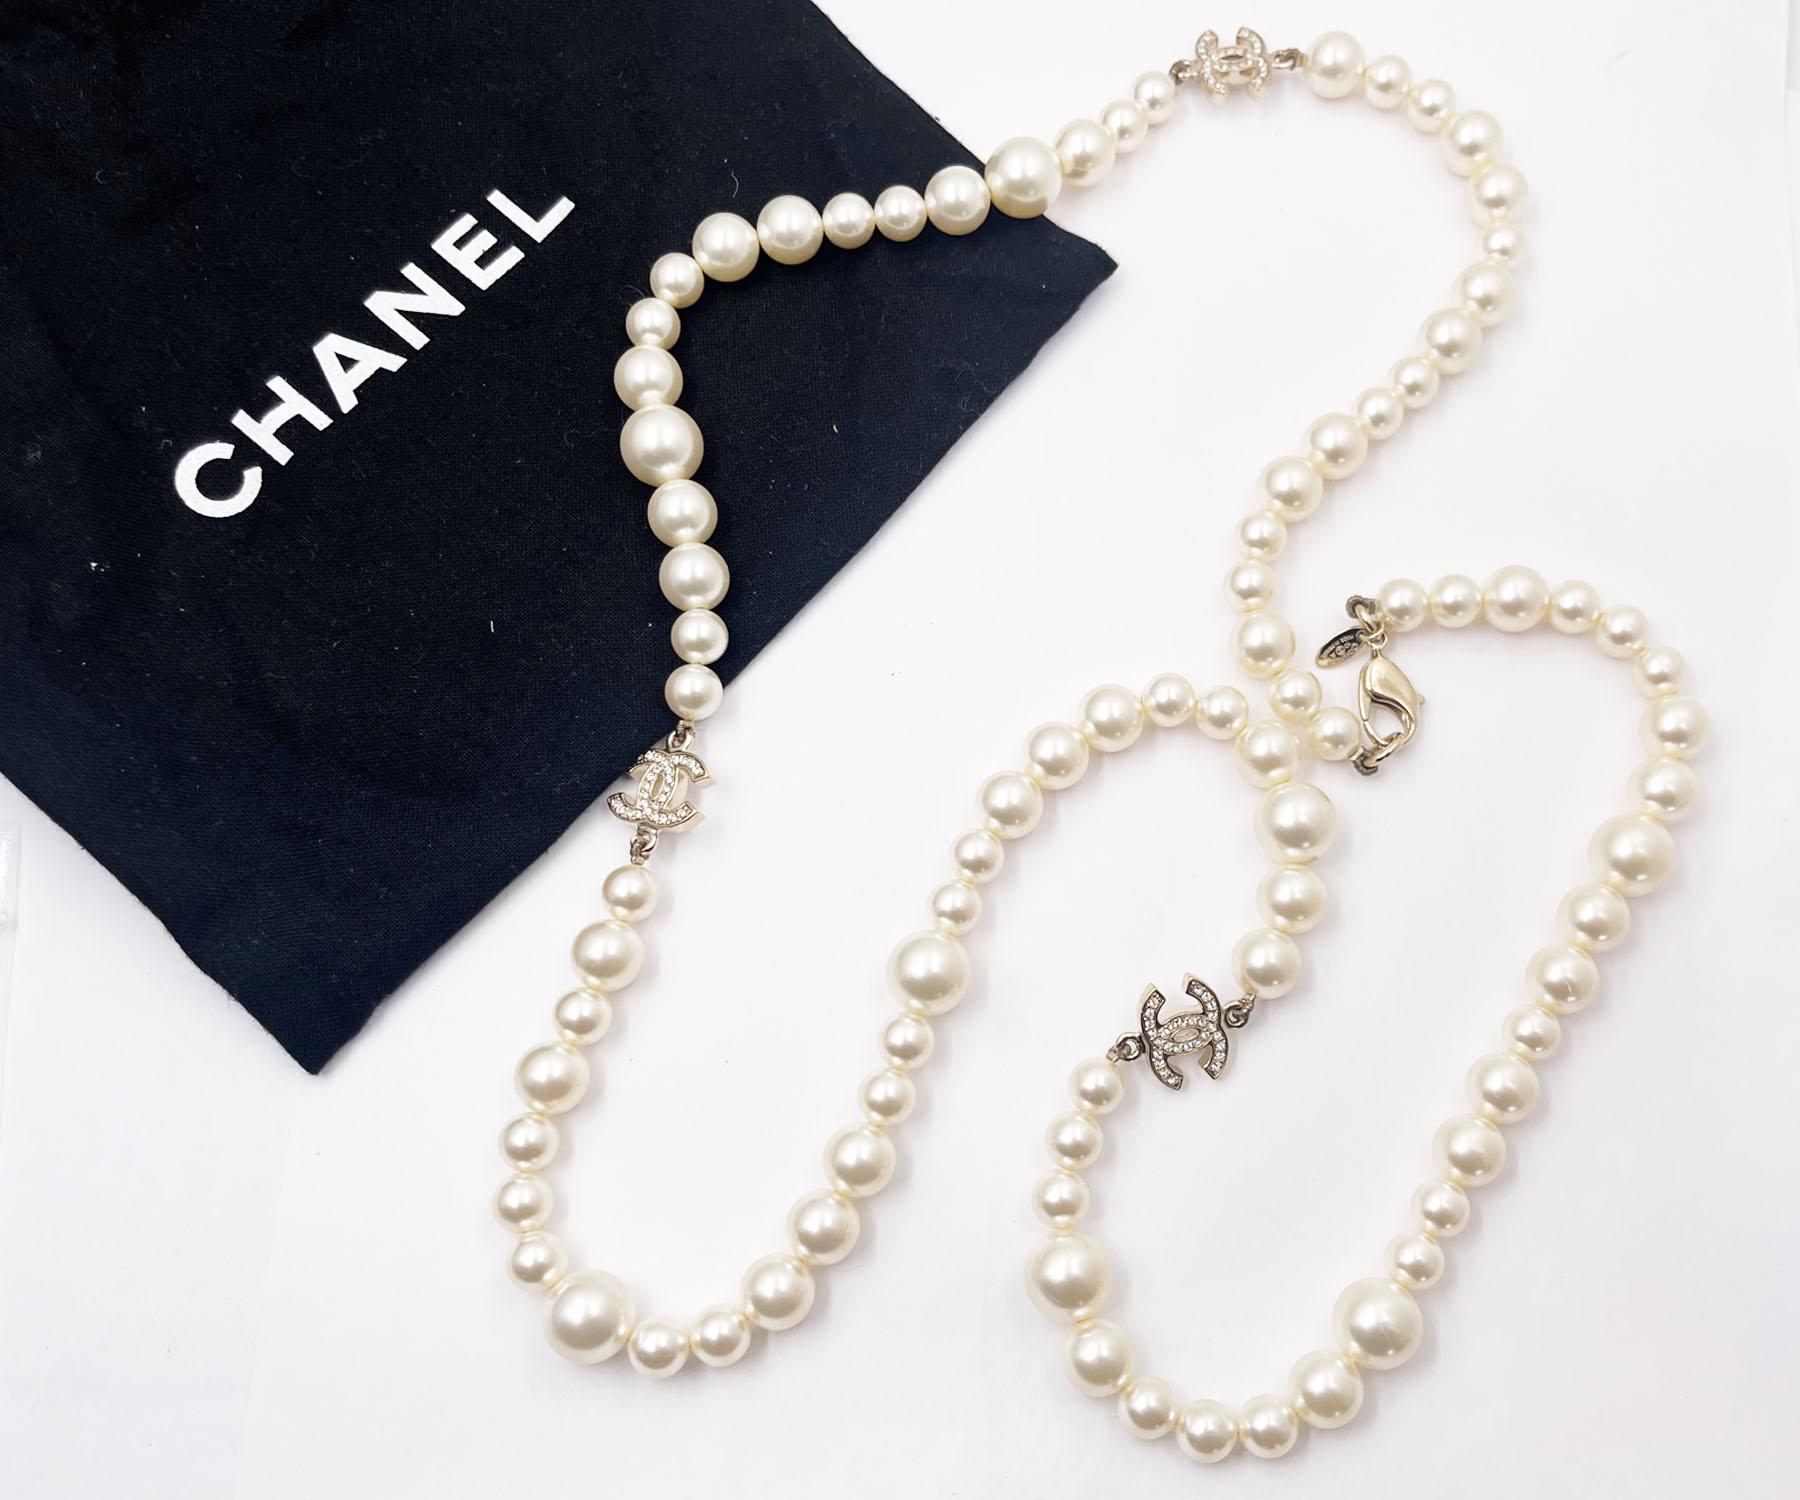 Chanel Classic 3 Gold CC Crystal Long Pearl Necklace

*Marked 10
*Made in France
*Comes with original dustbag

-It is approximately 36